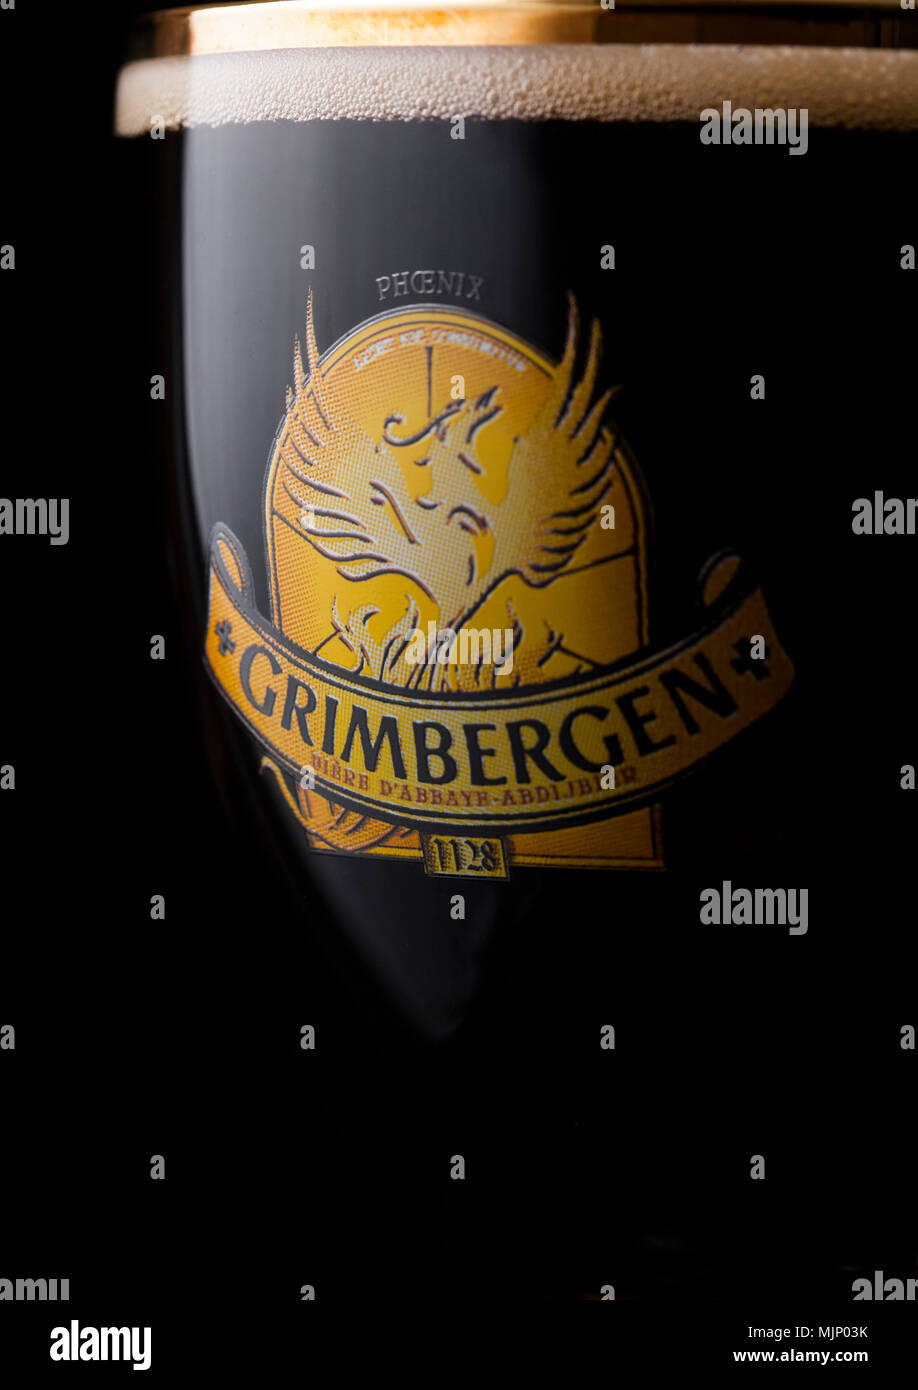 LONDON, UK - MAY 03, 2018: Cold Glass of Grimbergen dubbel beer on black  background Stock Photo - Alamy